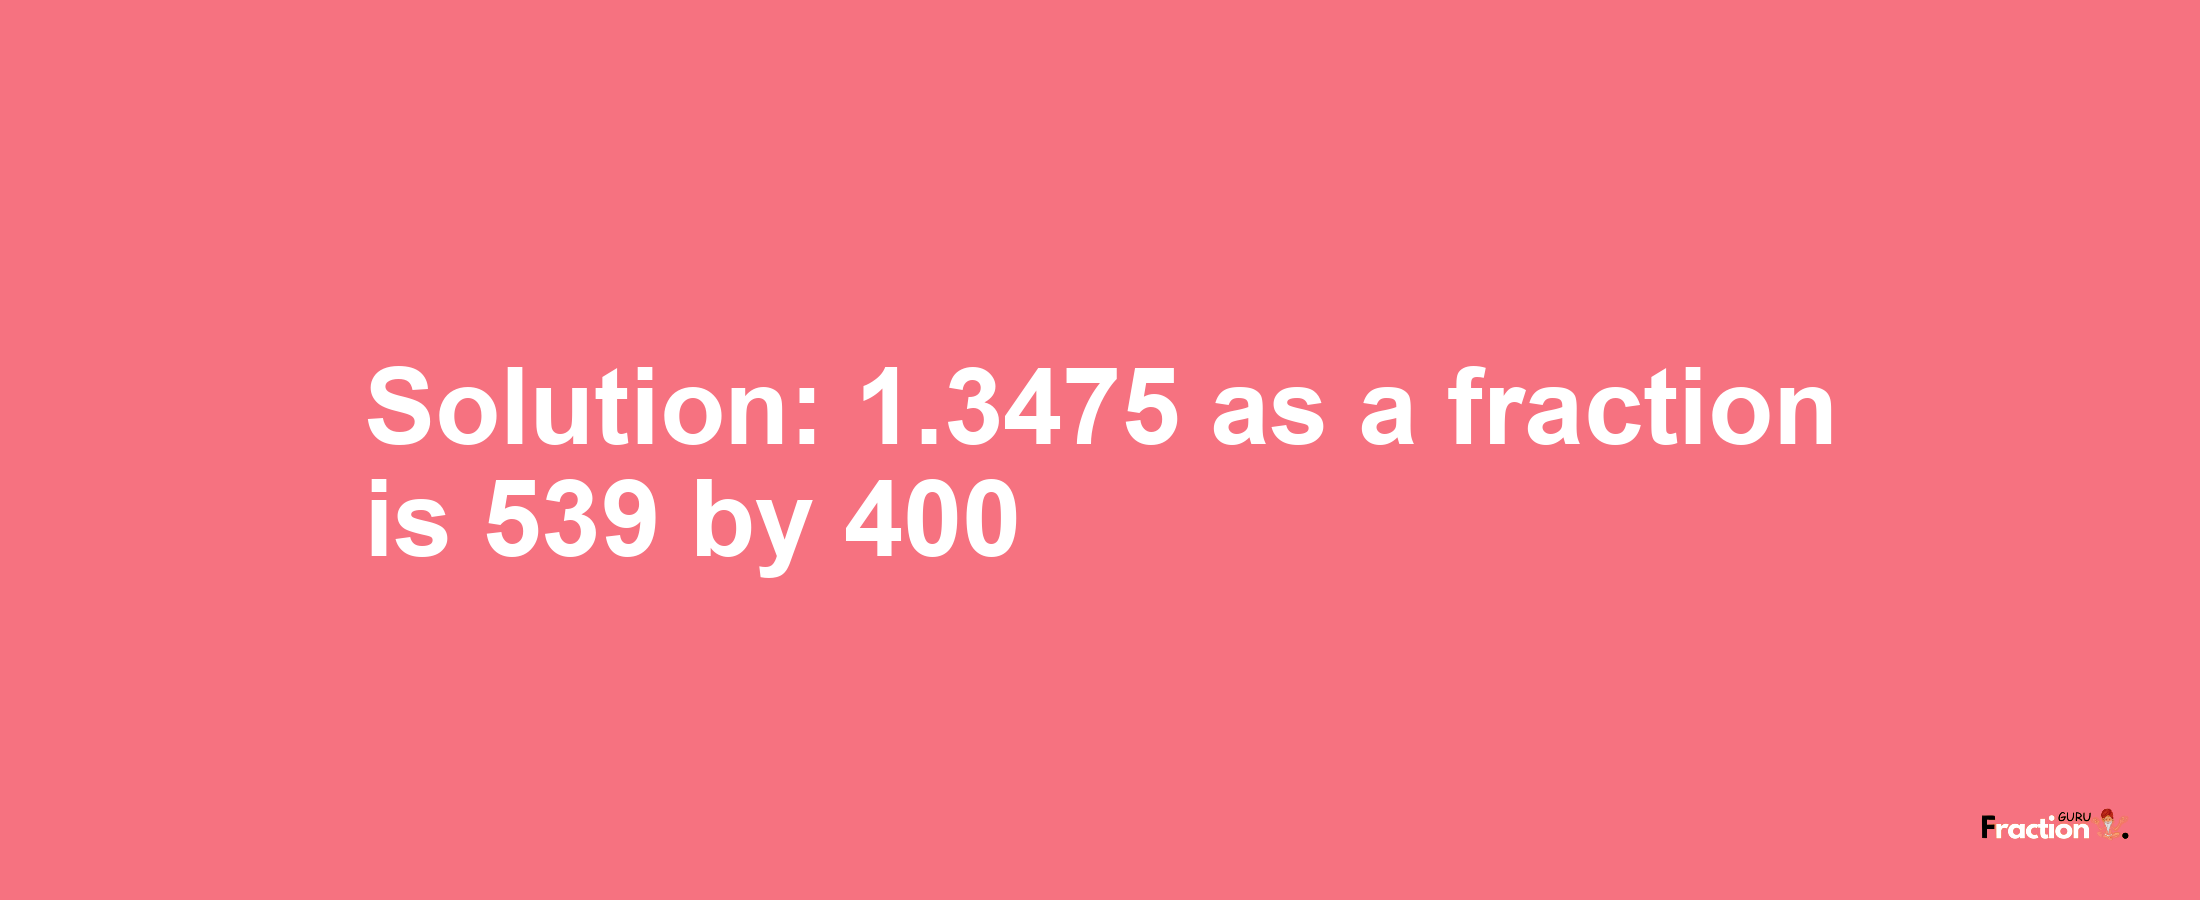 Solution:1.3475 as a fraction is 539/400